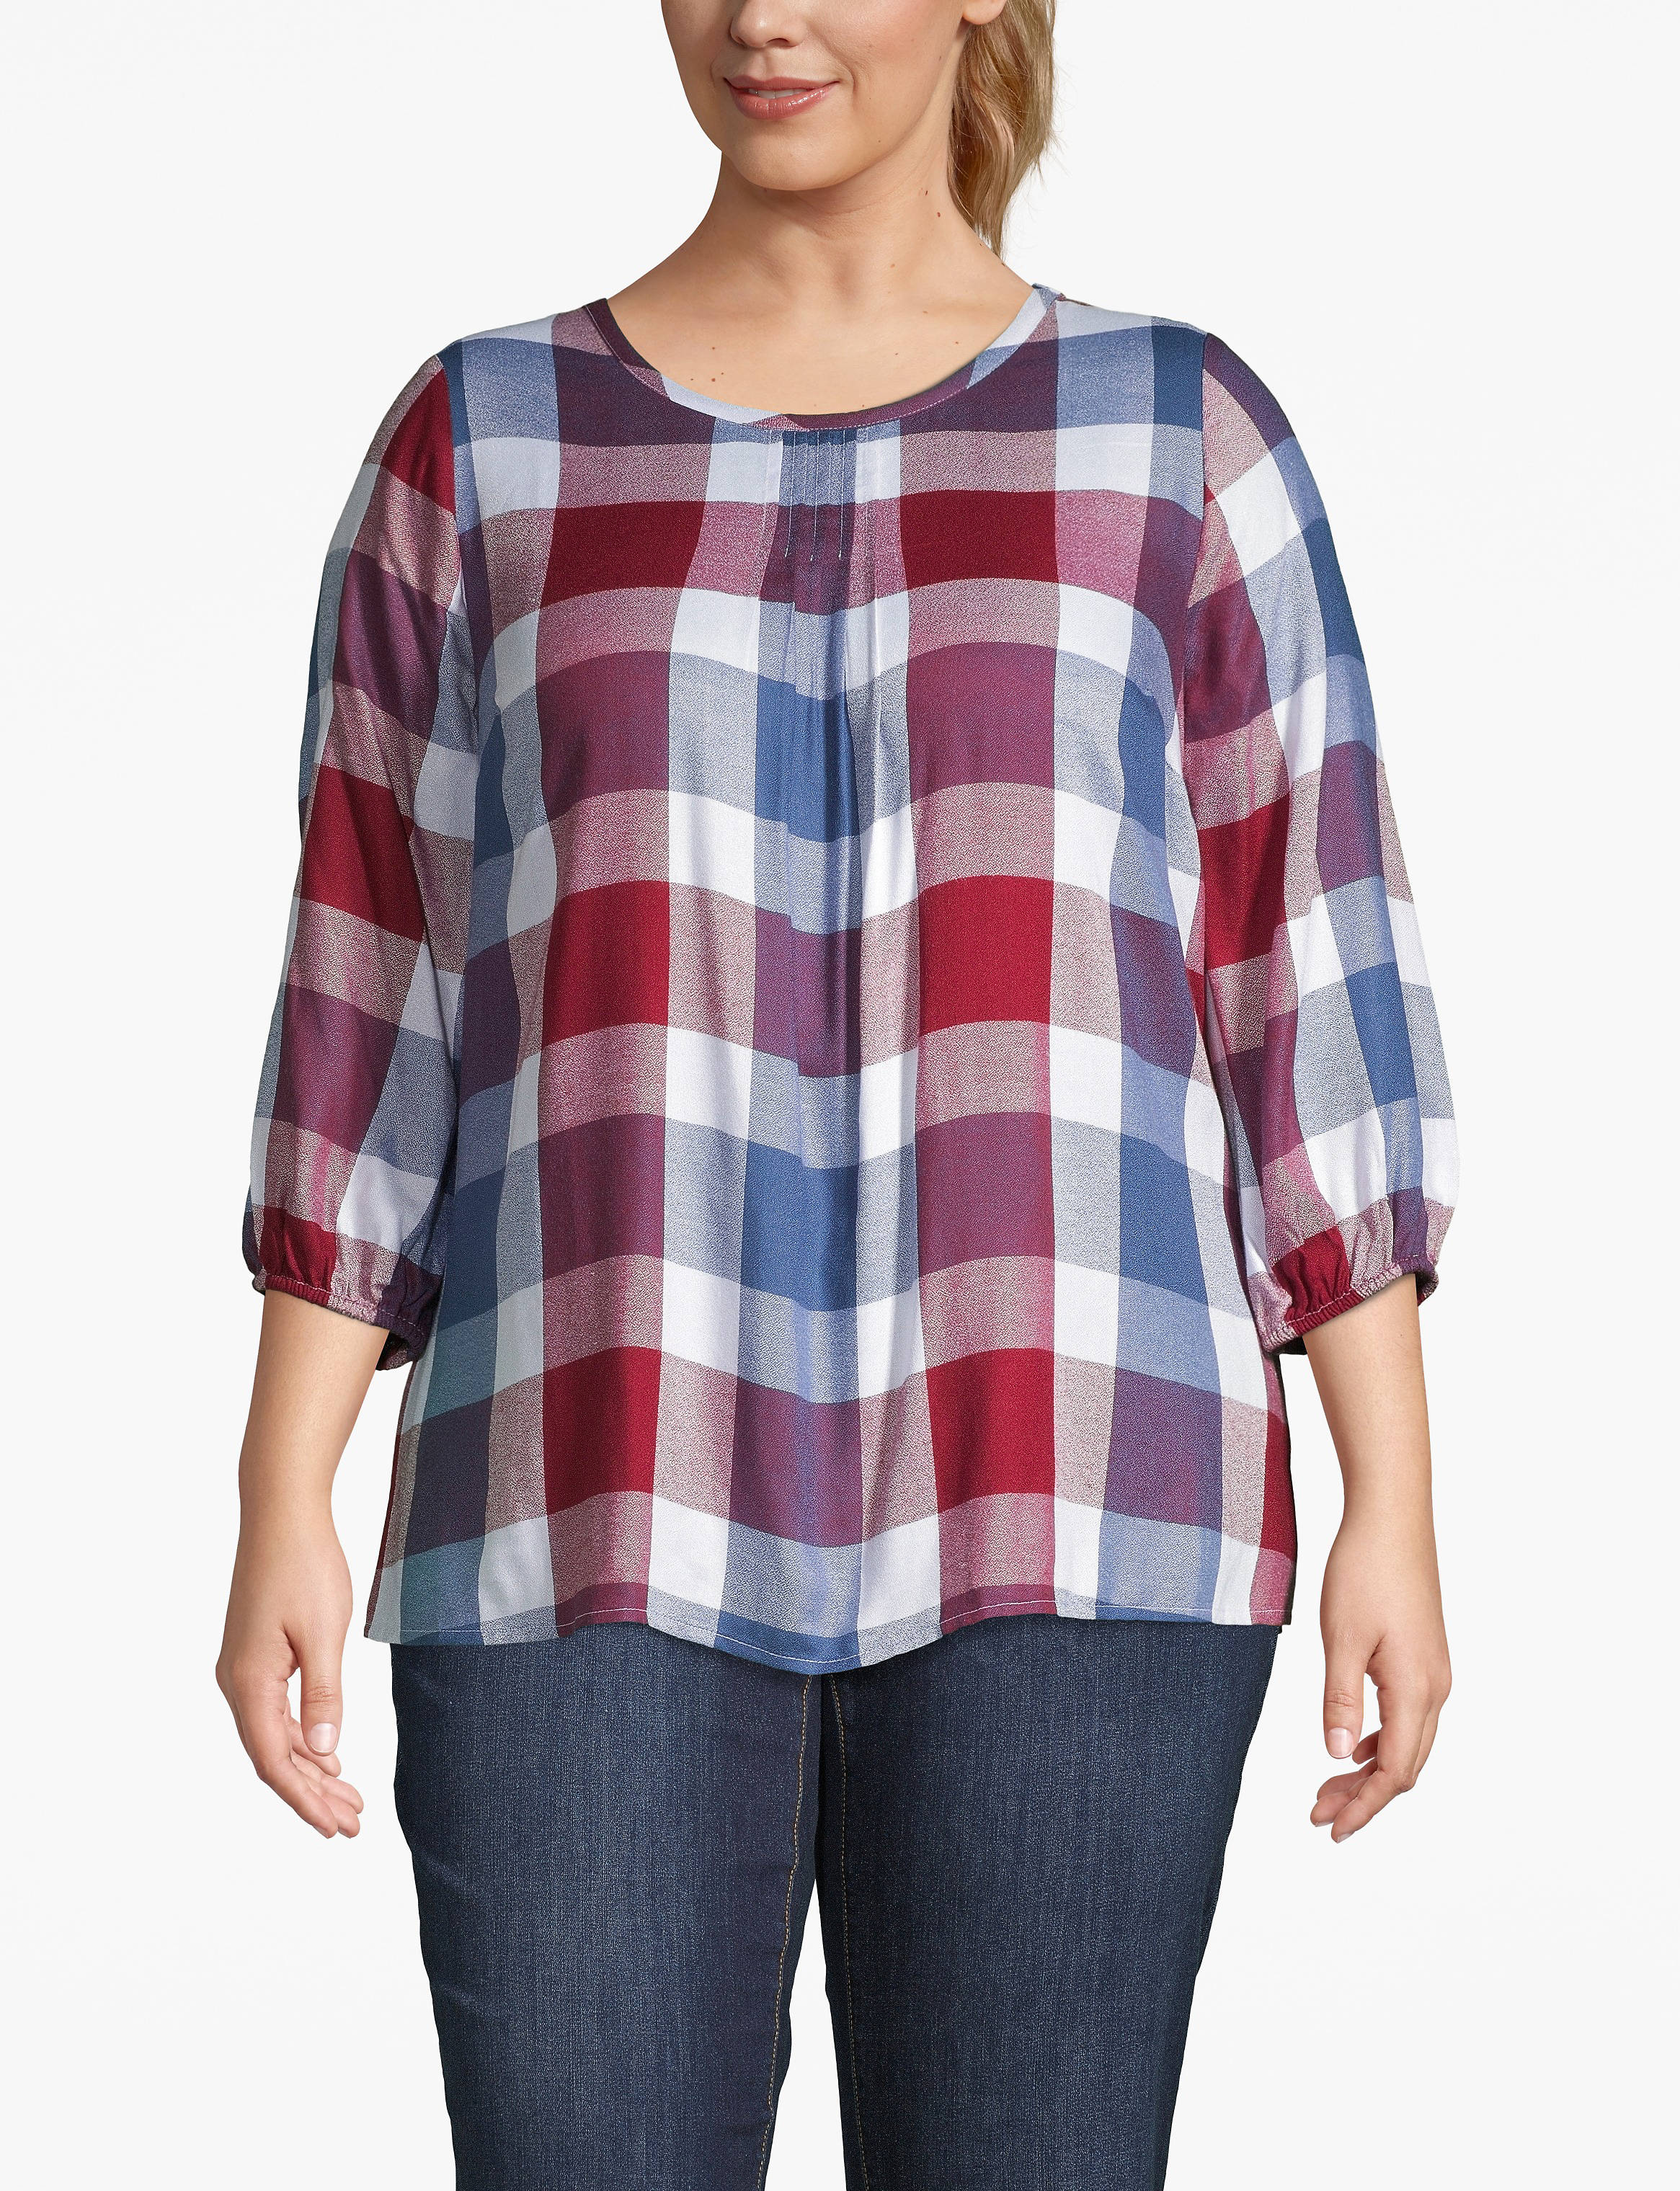 3/4 Sleeve Scoop Neck Peasant Blouse :blue/ red/ white buffalo check - as hanger:14 Product Image 1